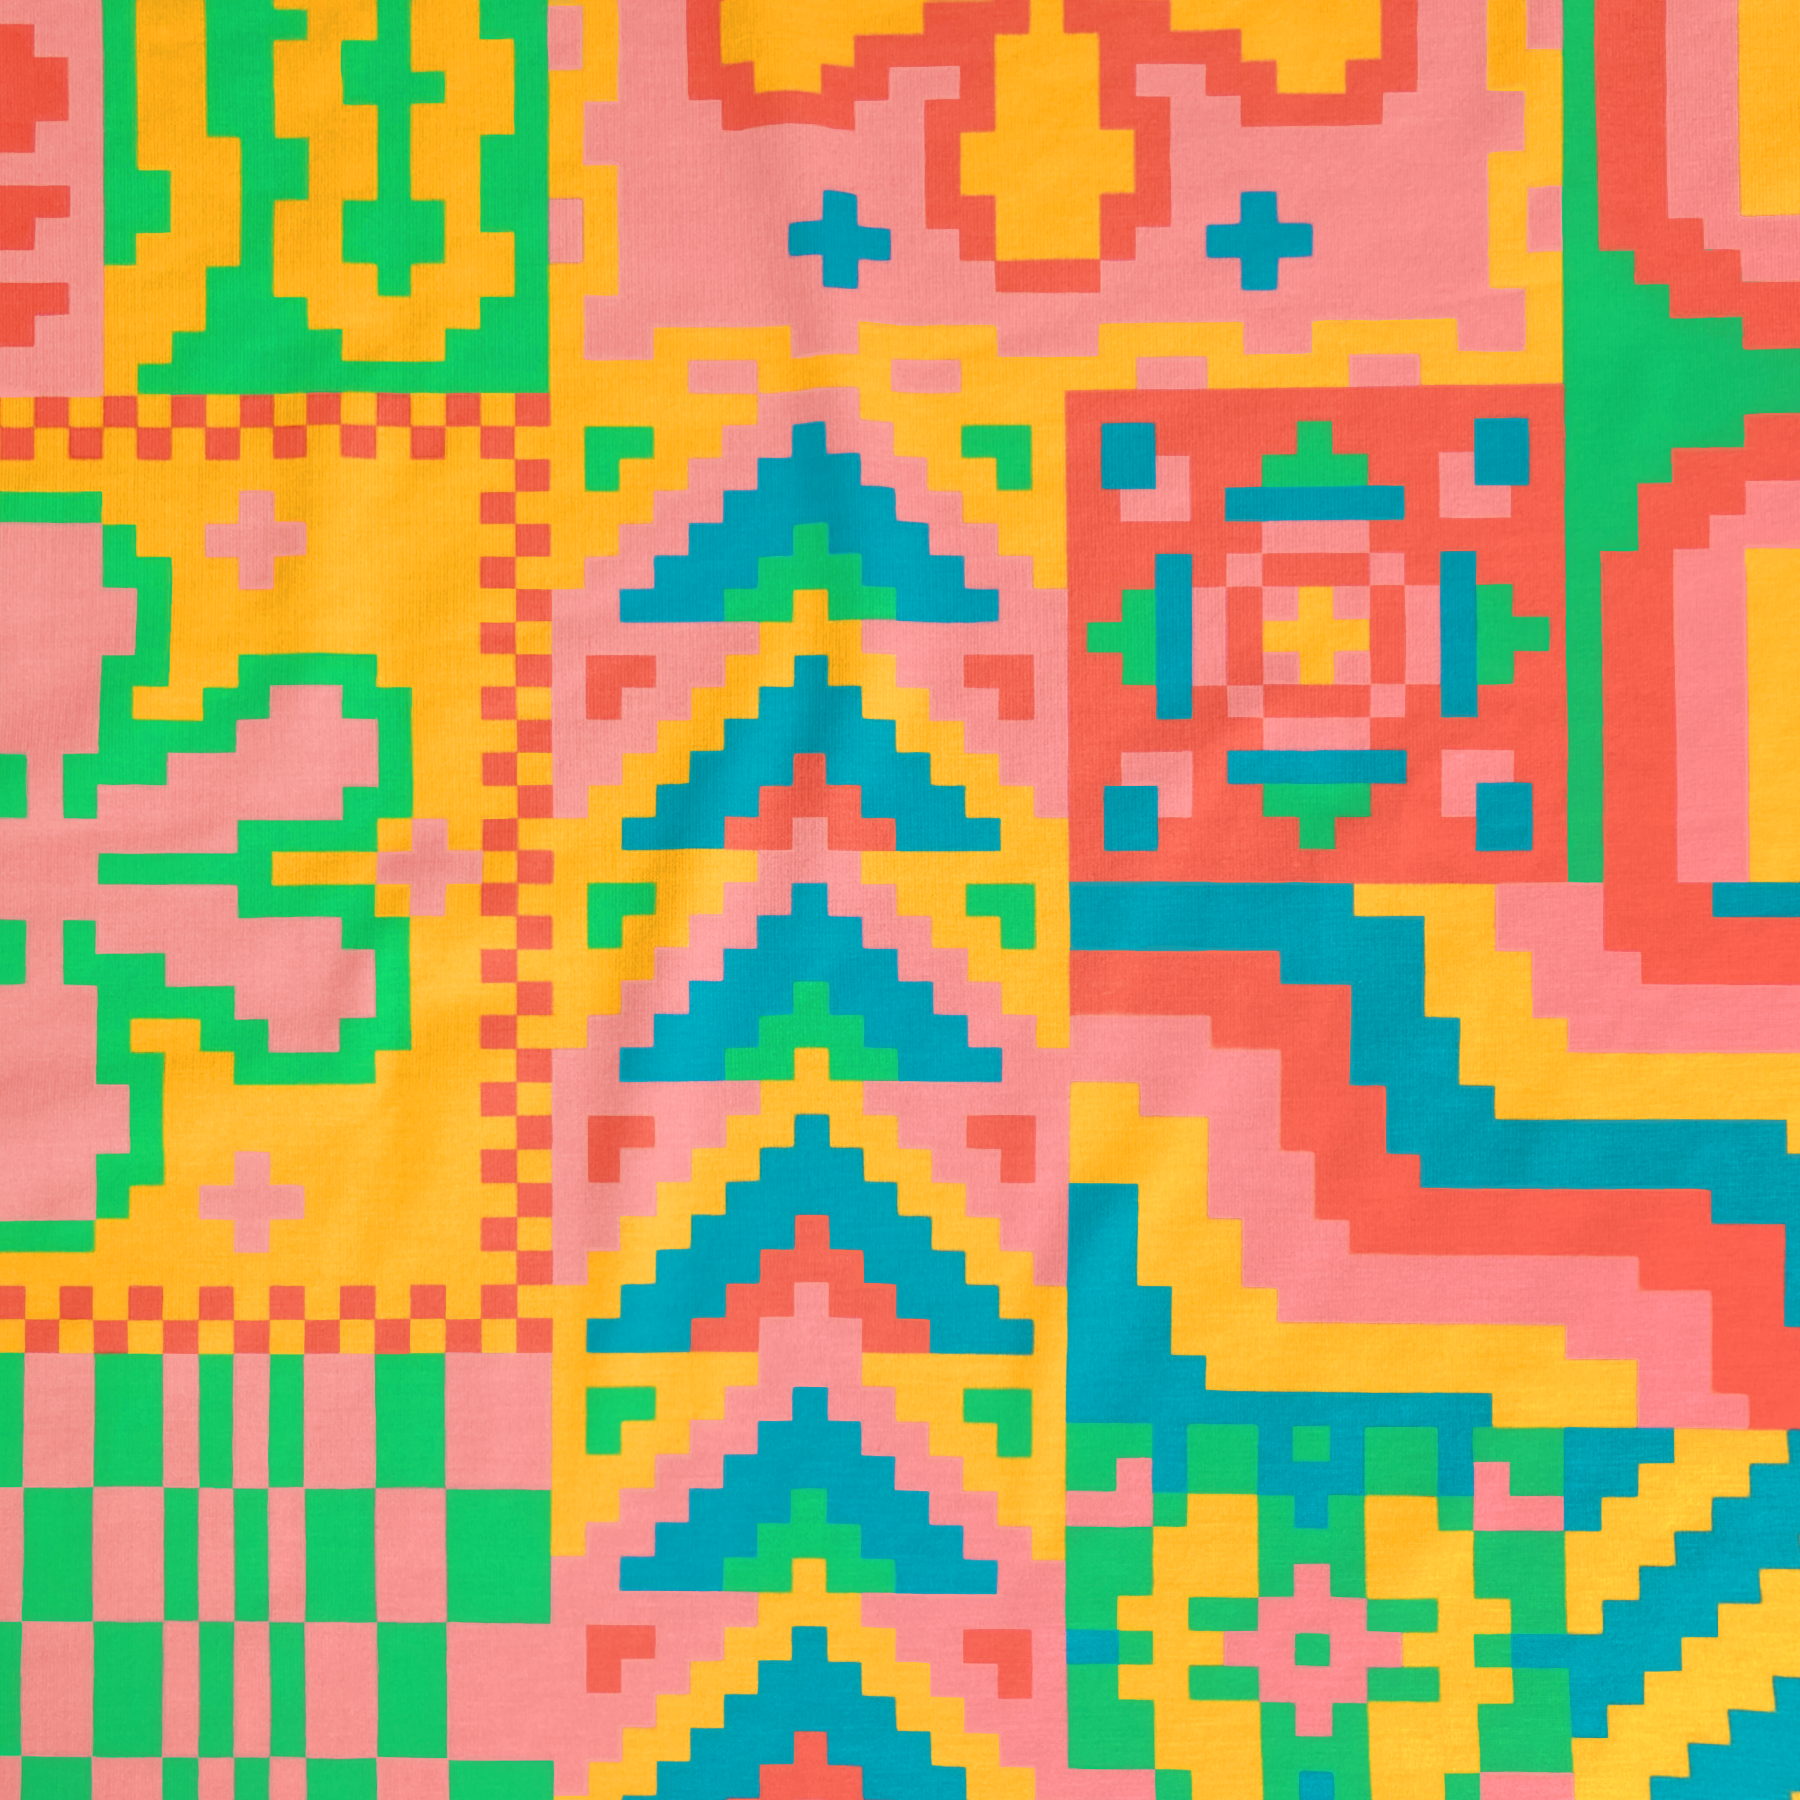 Pixel Stitch (key pattern) is a cross-stitch pattern inspired repeat pattern with quilt block style panels of starbursts, checkerboards, pixelated stripes, and blocky design motifs. It is set in Lucky Fruit colorway, neon pastels in kelly green, sunshine yellow, blush pink, cerulean blue, and watermelon red.